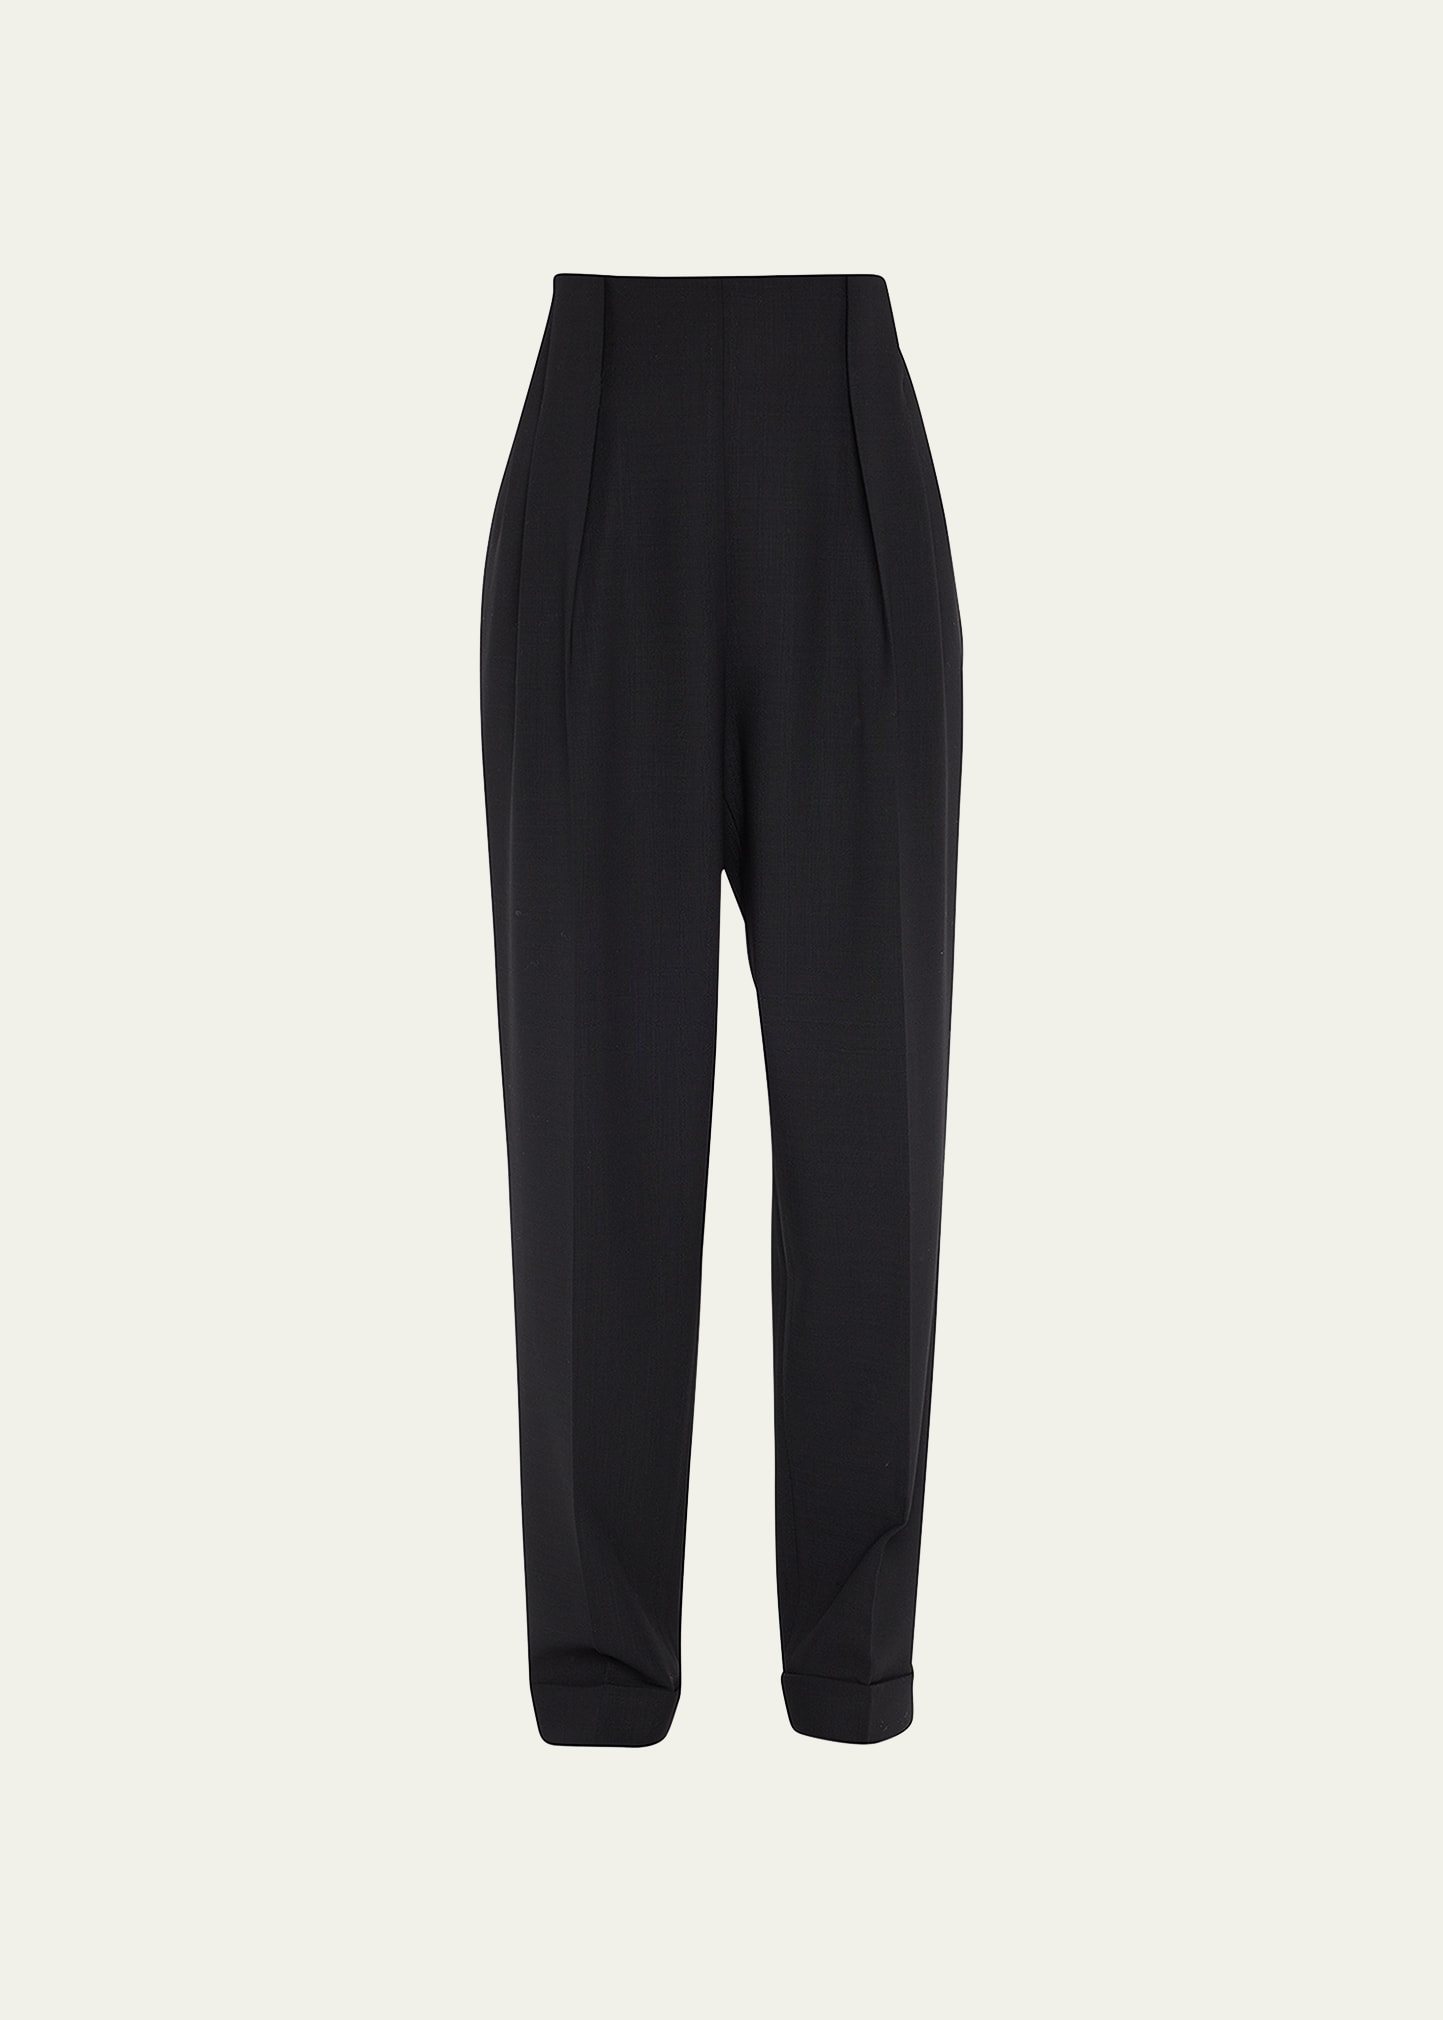 Waverly Pleated Tapered Pants